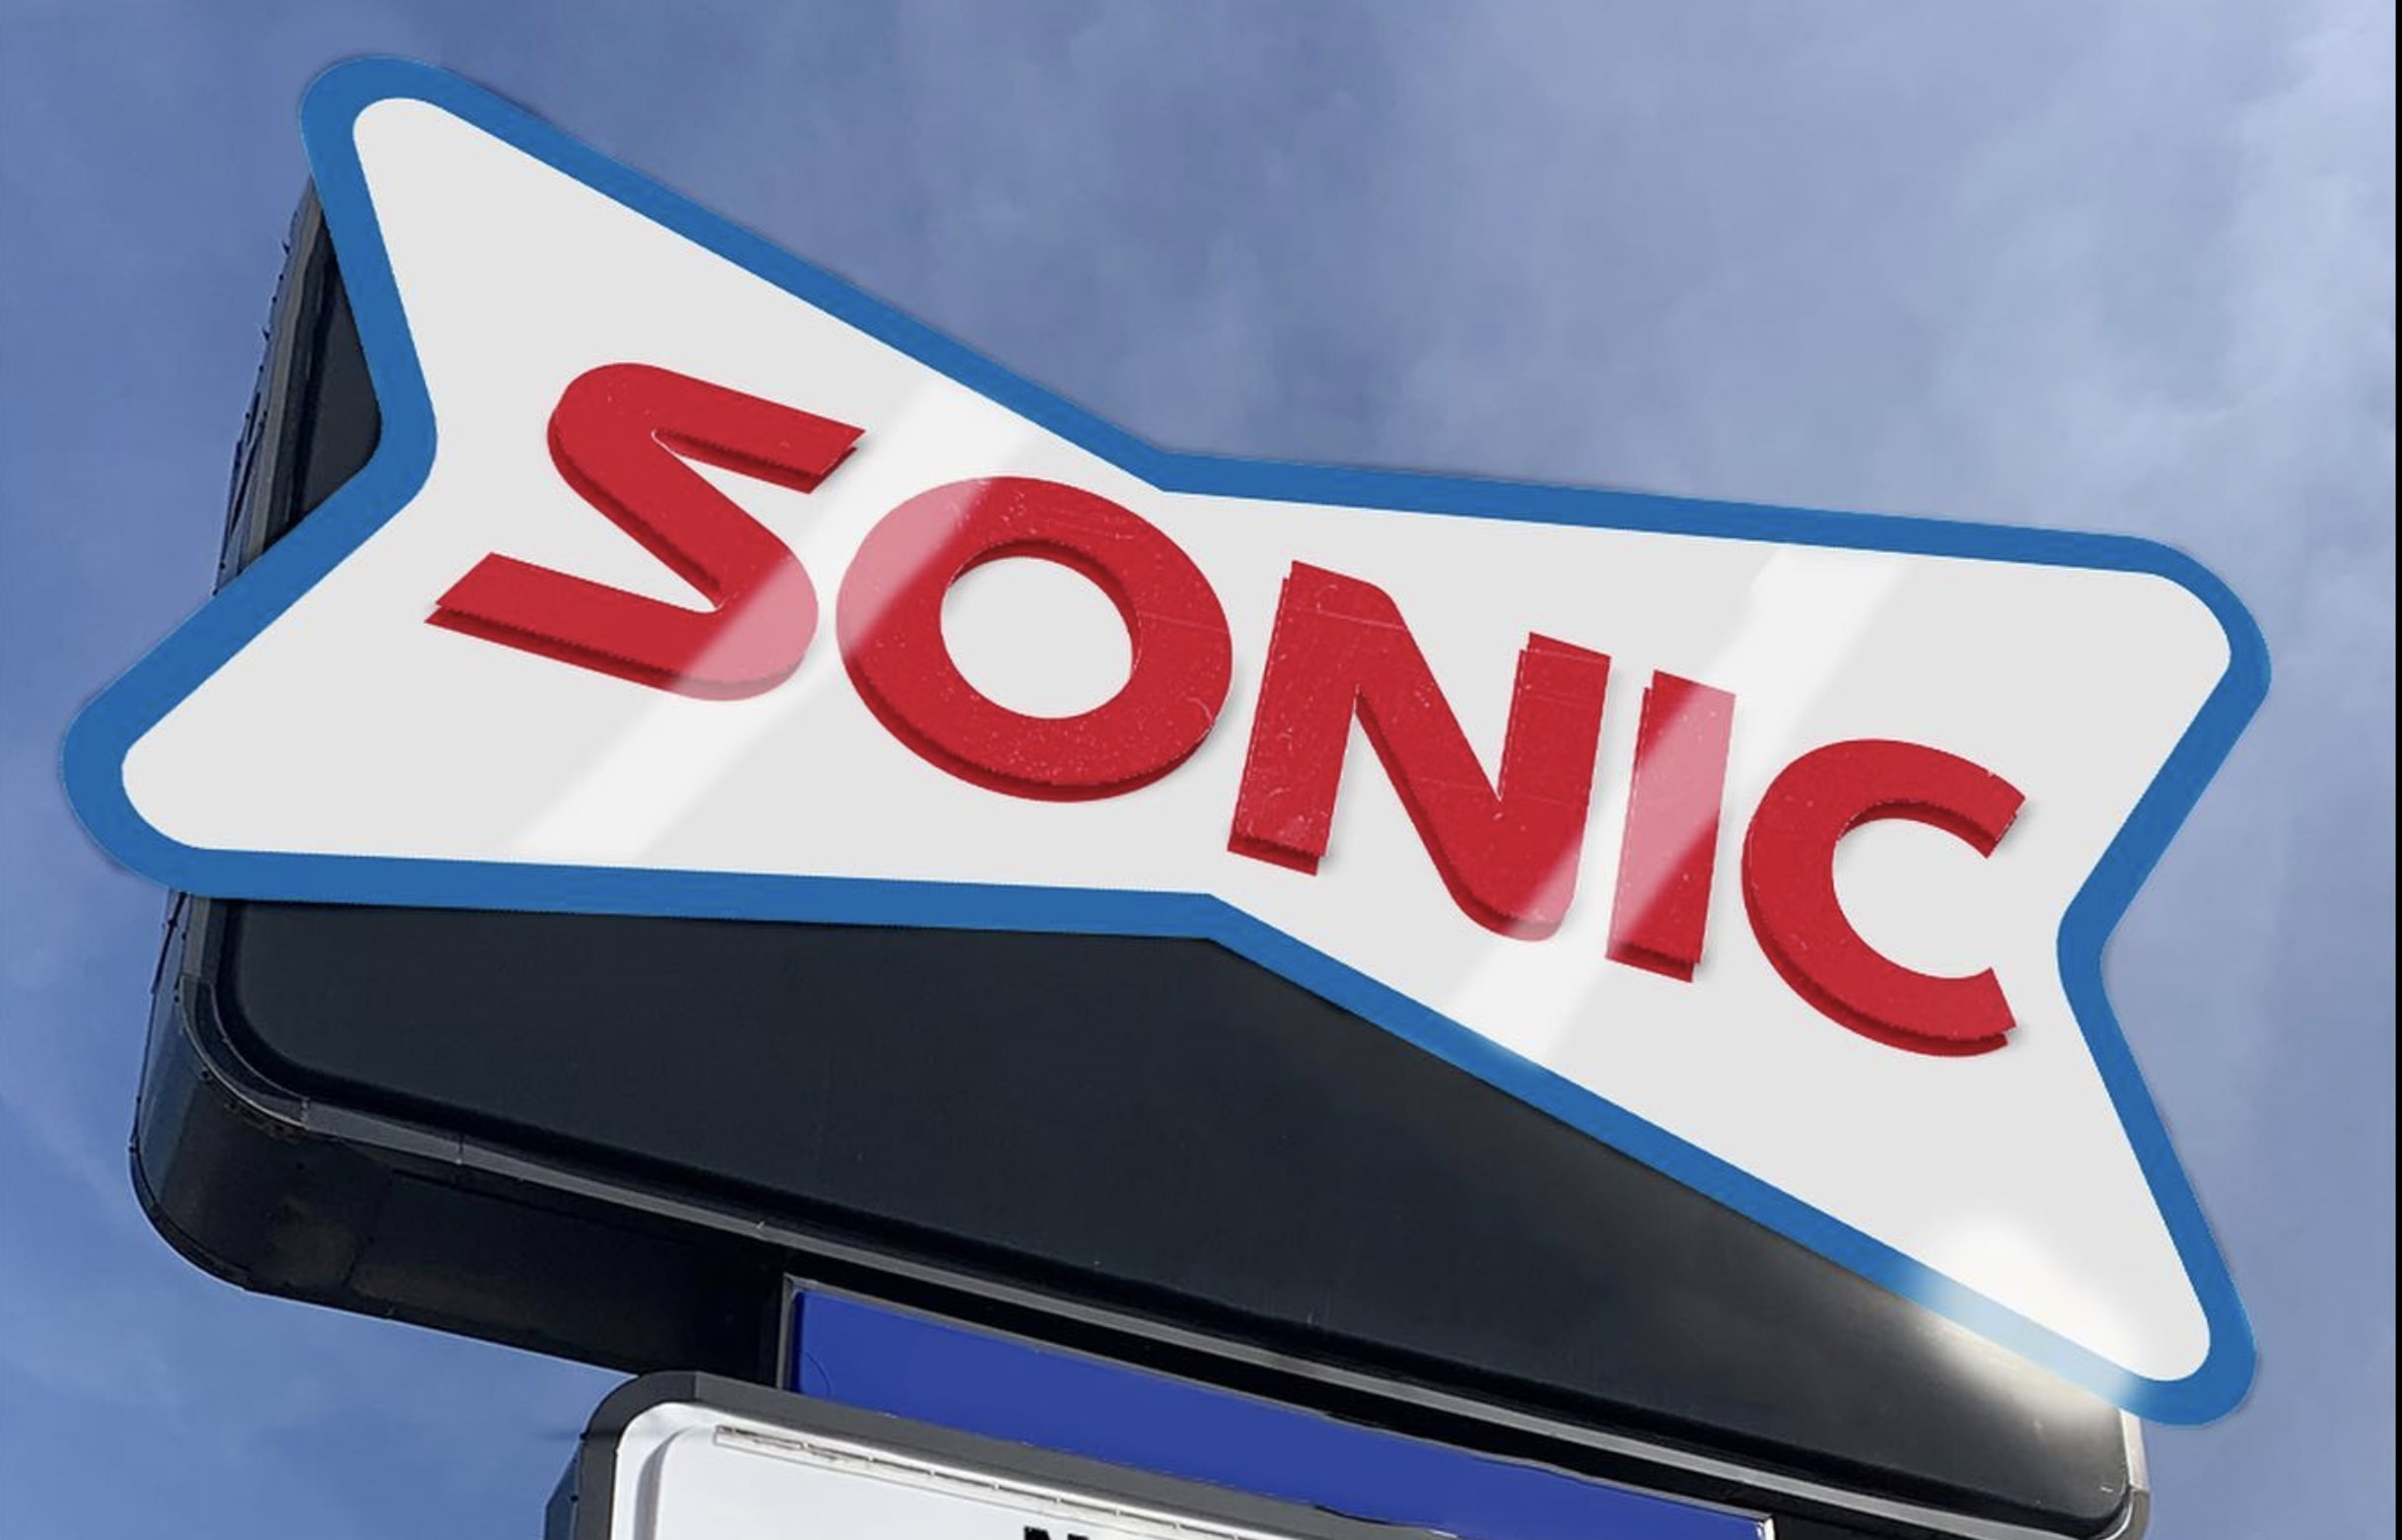 Leesburg Sonic Drive-In could start construction this summer - The